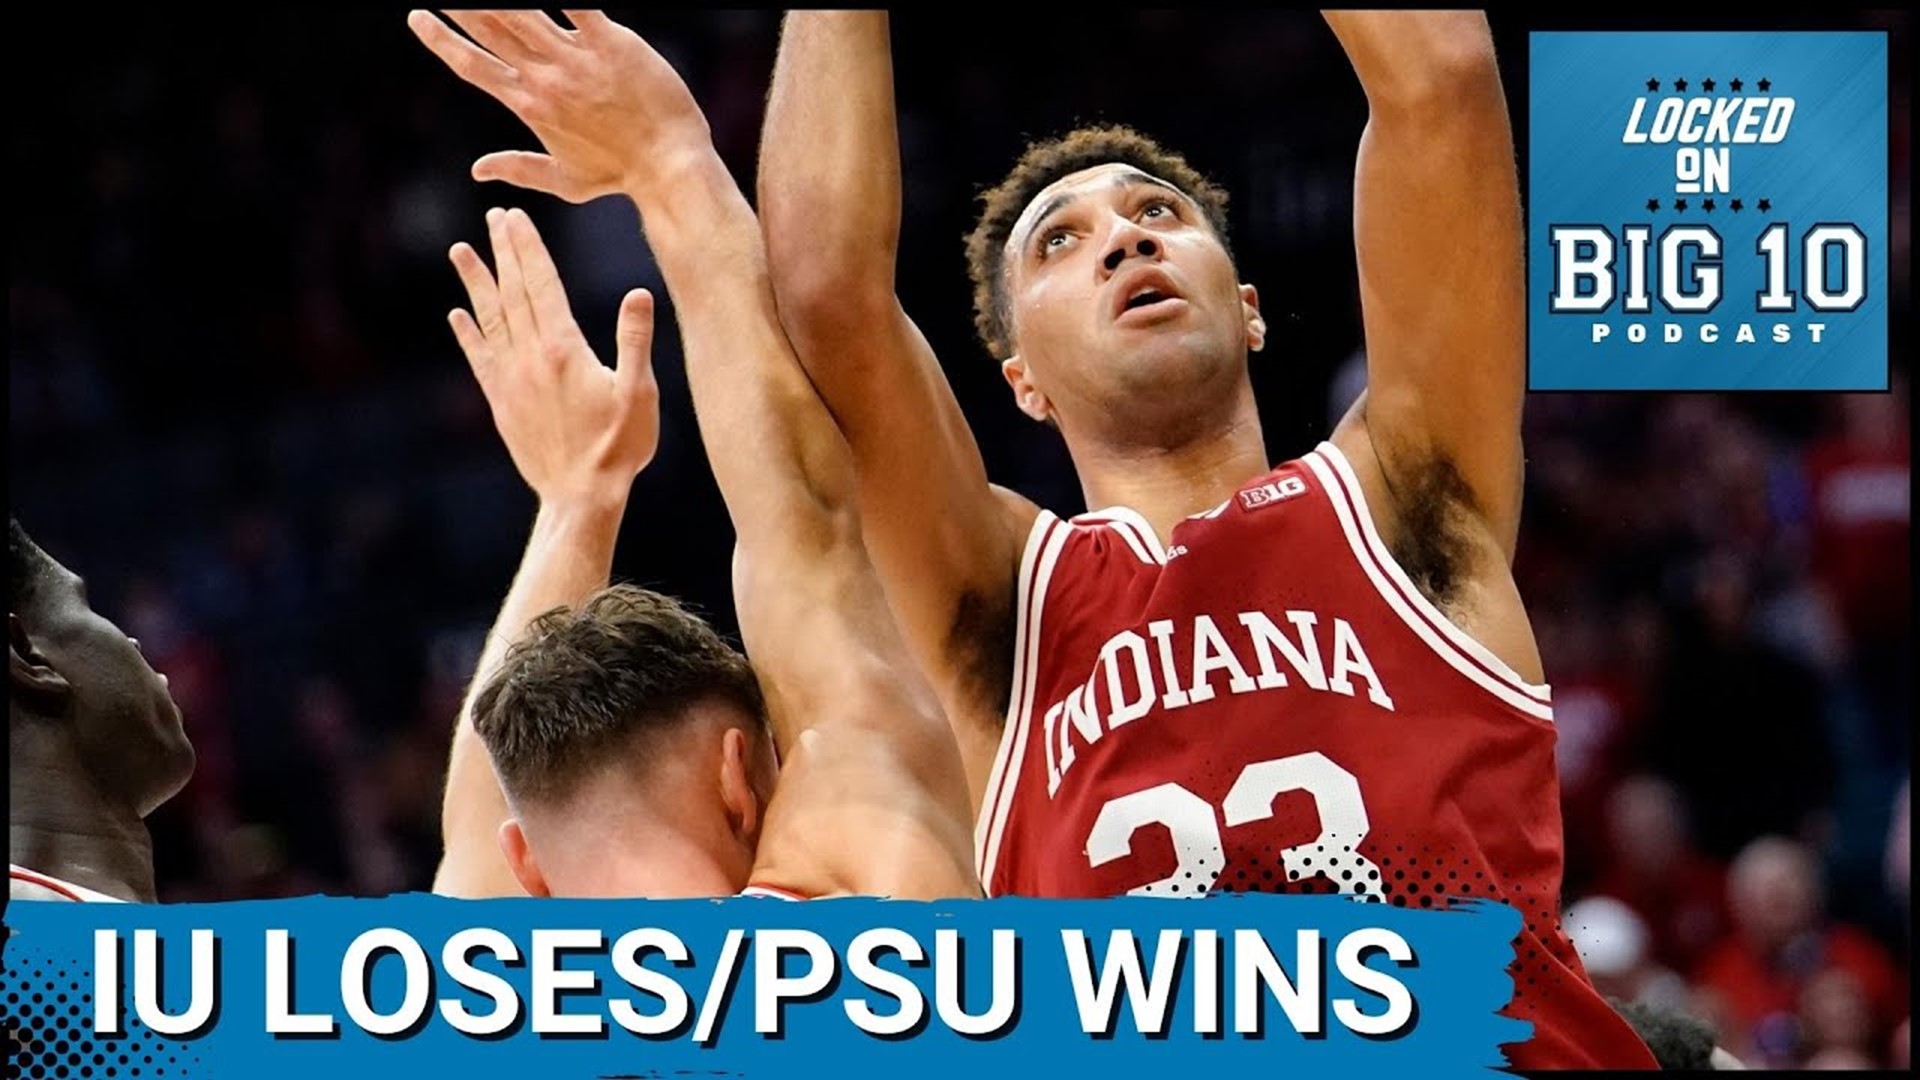 Indiana Takes Another Loss And Penn State Upsets Illinois Over The Weekend